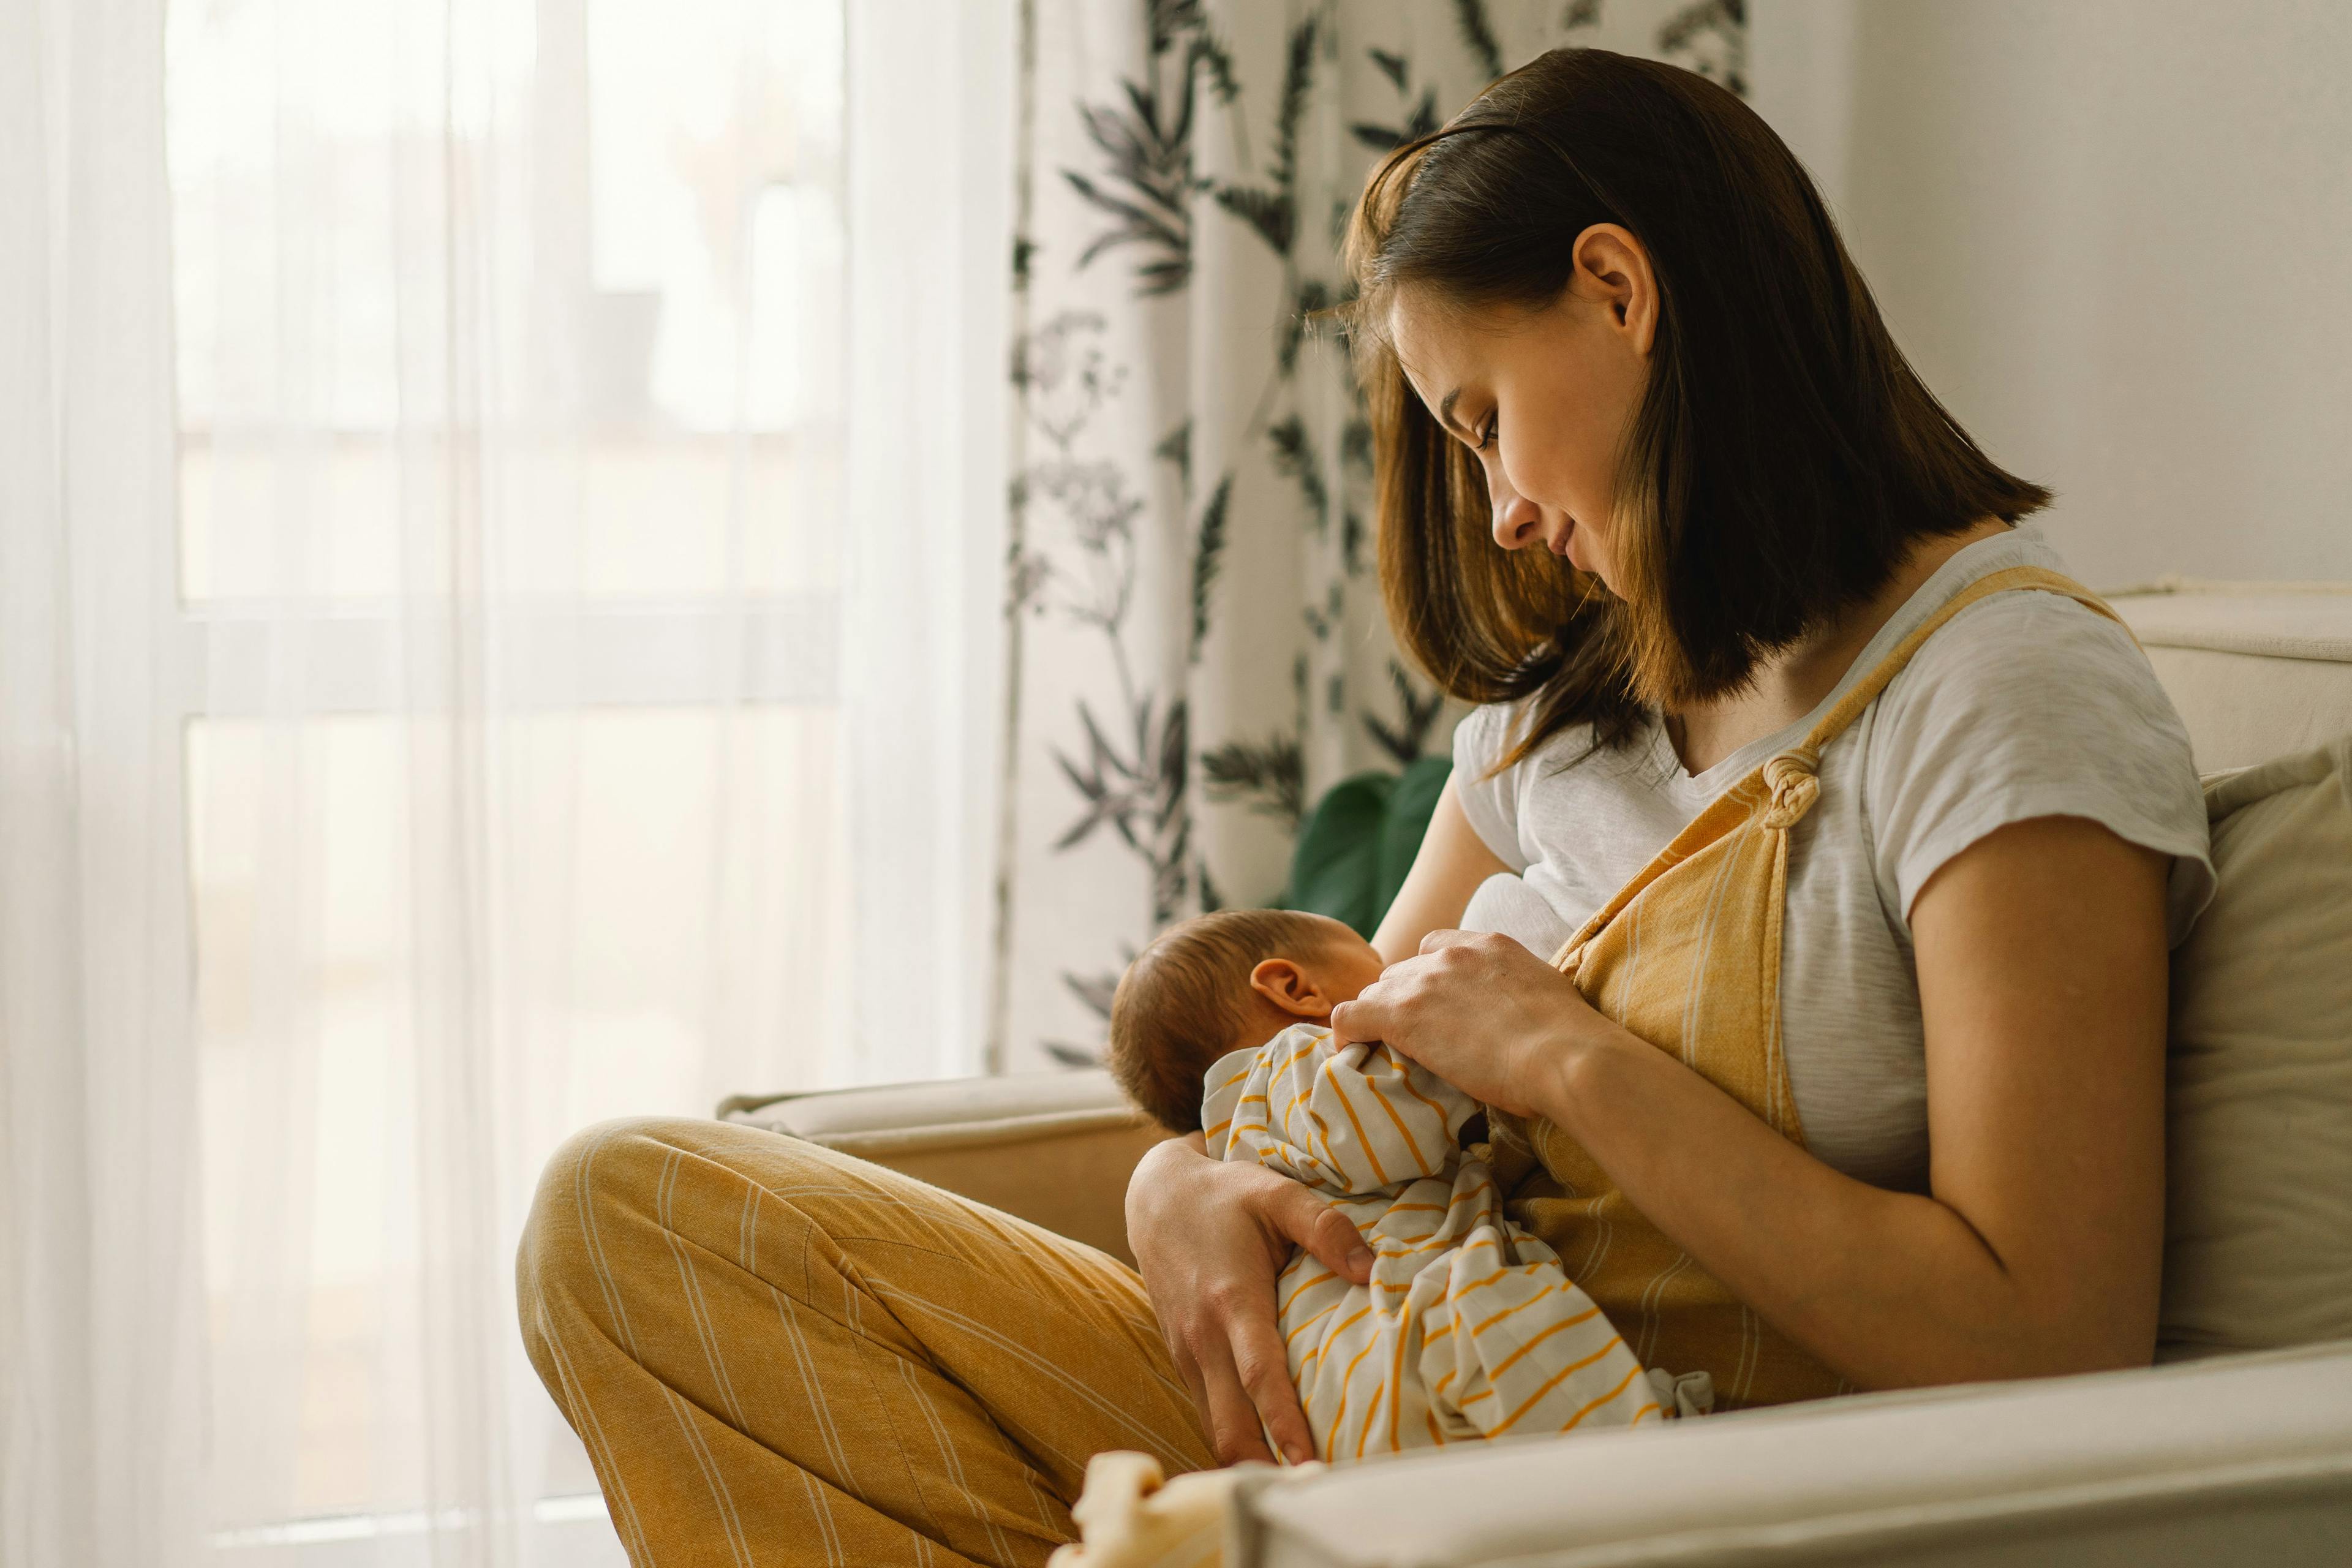 Research exposes inequalities in breastfeeding assistance for individuals with disabilities | Image Credit: © Анастасія Стягайло - © Анастасія Стягайло - stock.adobe.com.